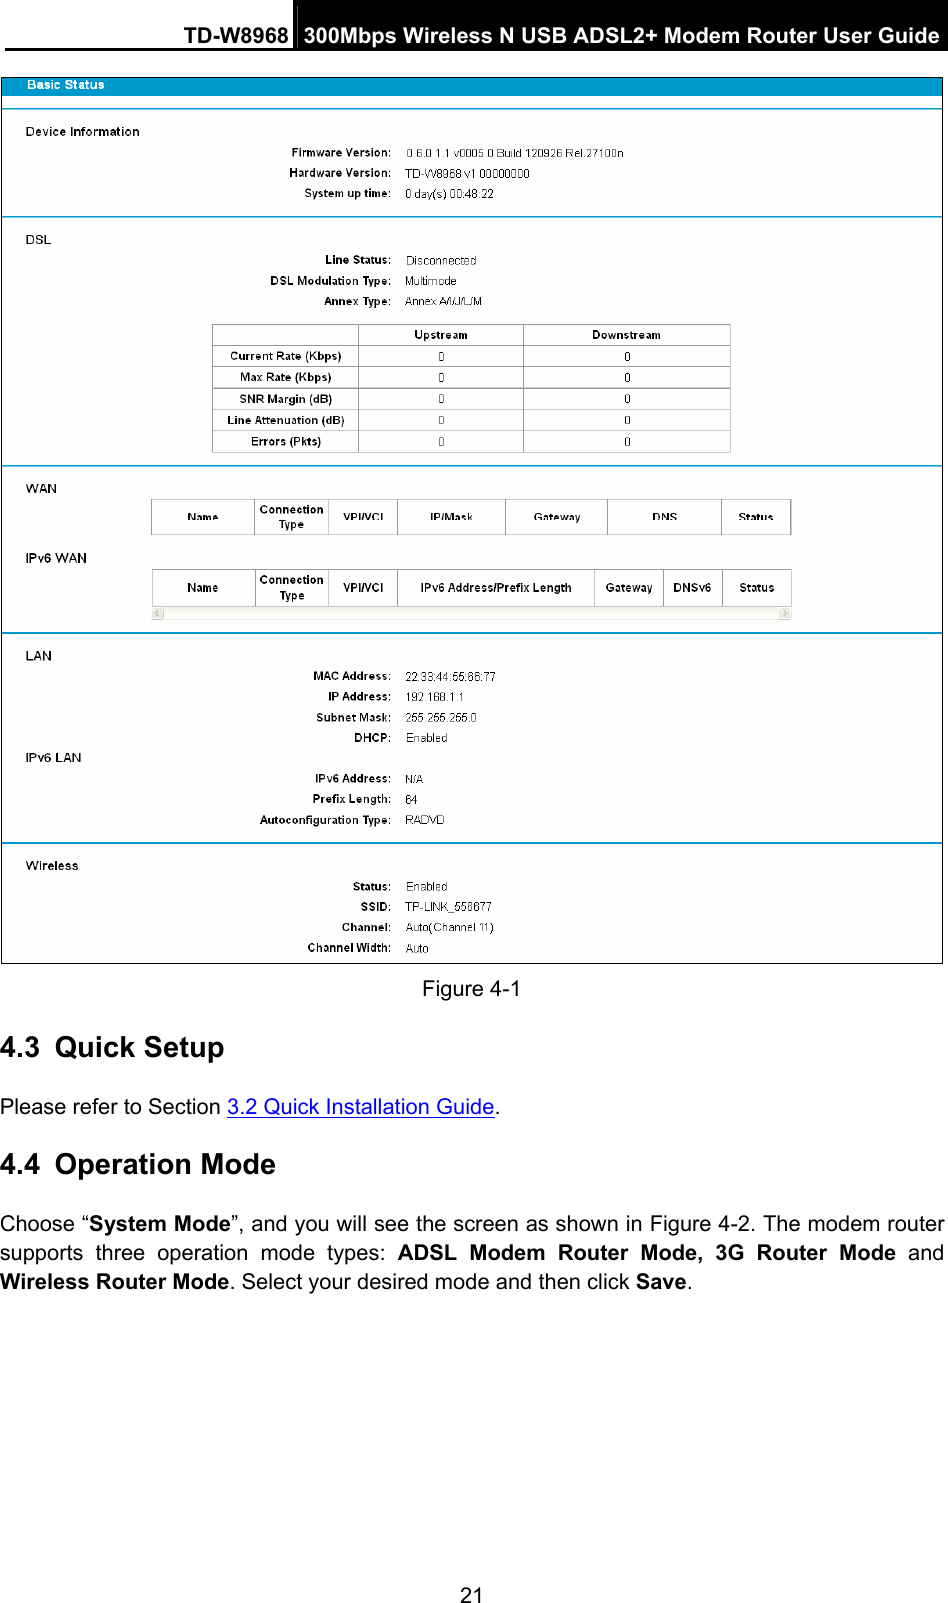 TD-W8968  300Mbps Wireless N USB ADSL2+ Modem Router User Guide 21  Figure 4-1 4.3  Quick Setup Please refer to Section 3.2 Quick Installation Guide. 4.4  Operation Mode Choose “System Mode”, and you will see the screen as shown in Figure 4-2. The modem router supports three operation mode types: ADSL Modem Router Mode, 3G Router Mode and Wireless Router Mode. Select your desired mode and then click Save. 